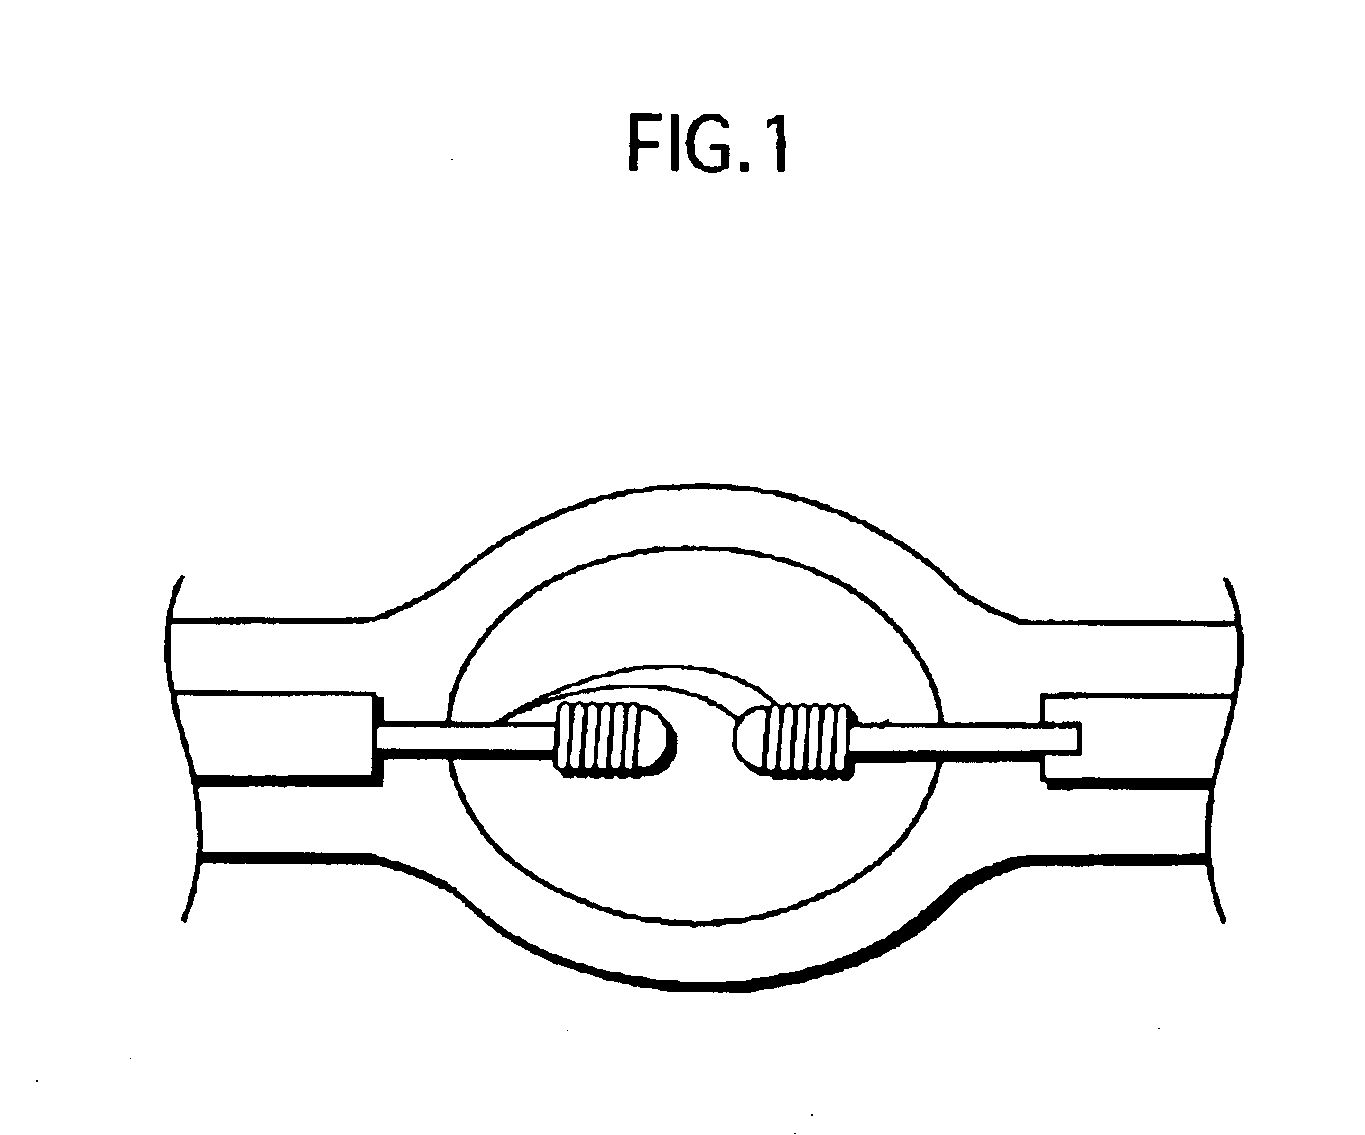 Lighting method and apparatus for high-pressure discharge lamp, and high-pressure discharge lamp apparatus